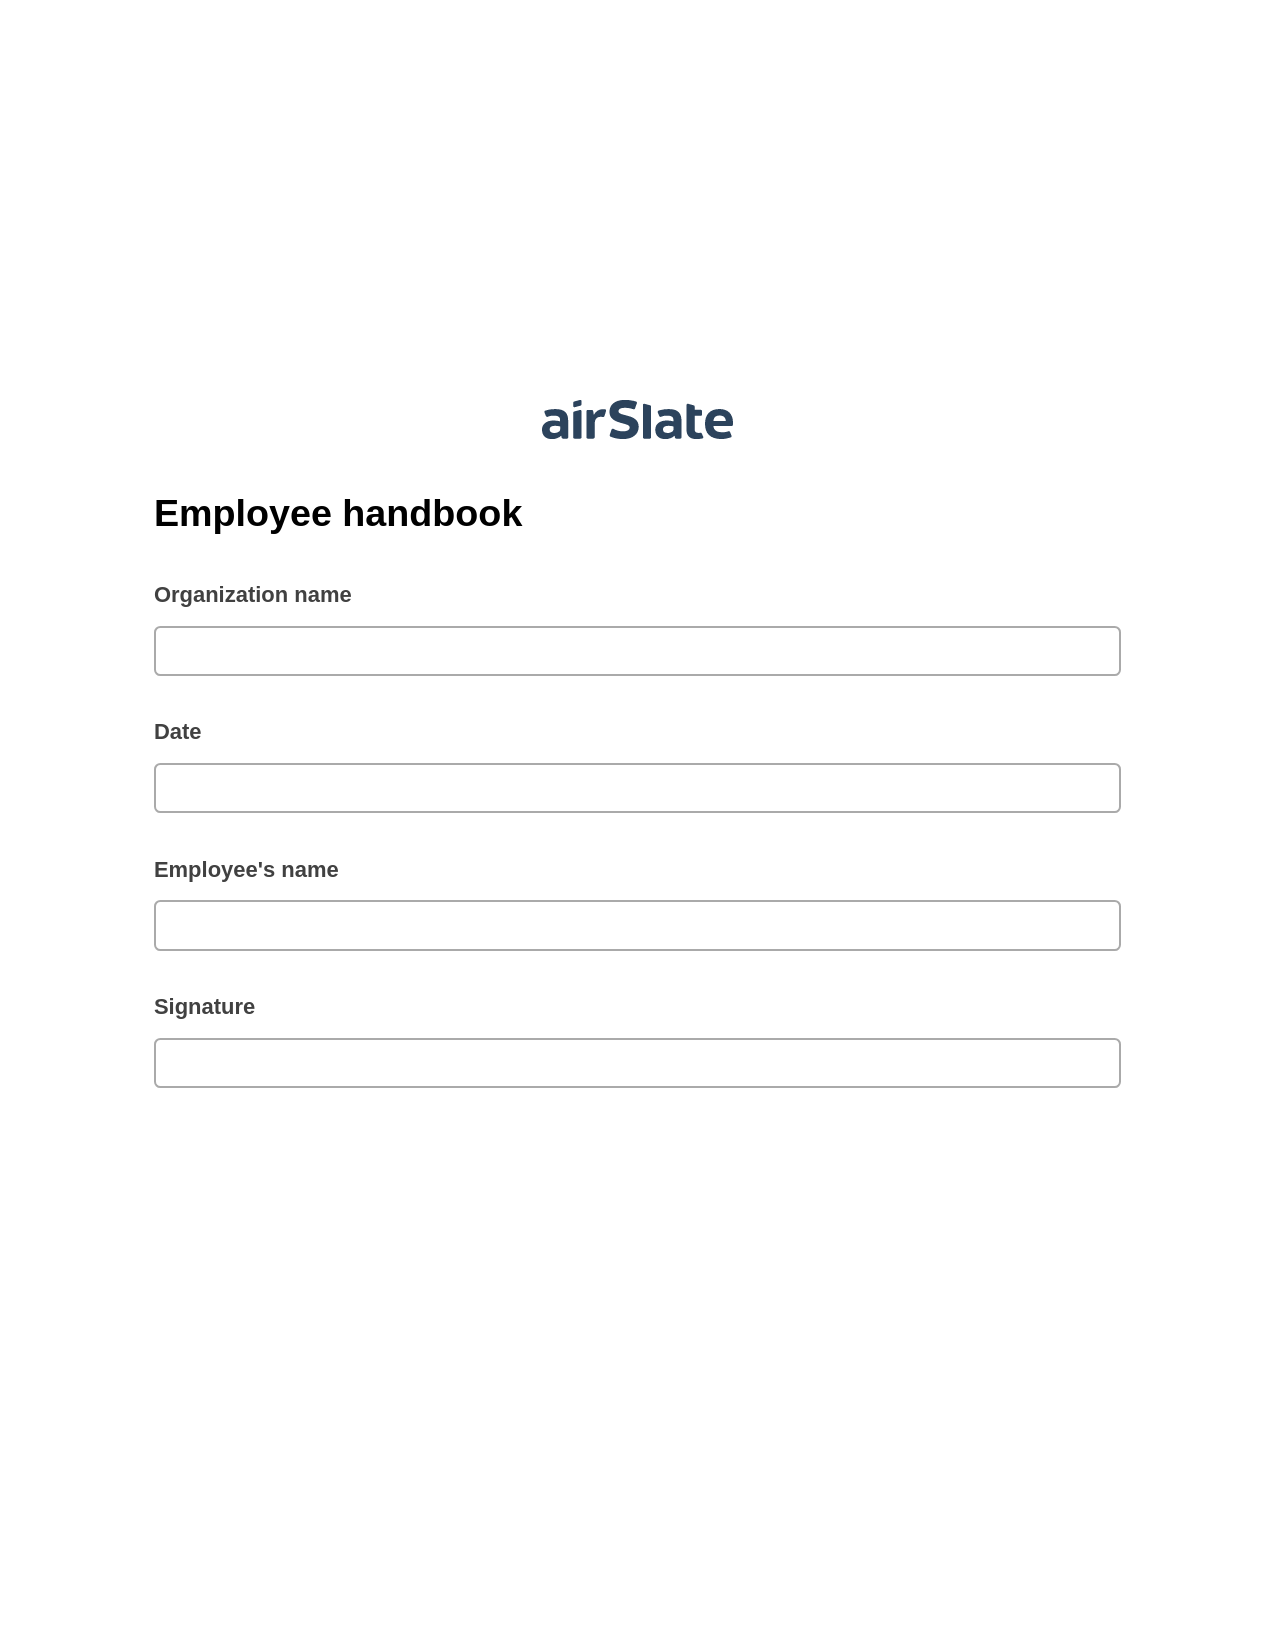 Employee handbook Pre-fill from CSV File Bot, Send a Slate to Salesforce Contact Bot, Export to Smartsheet